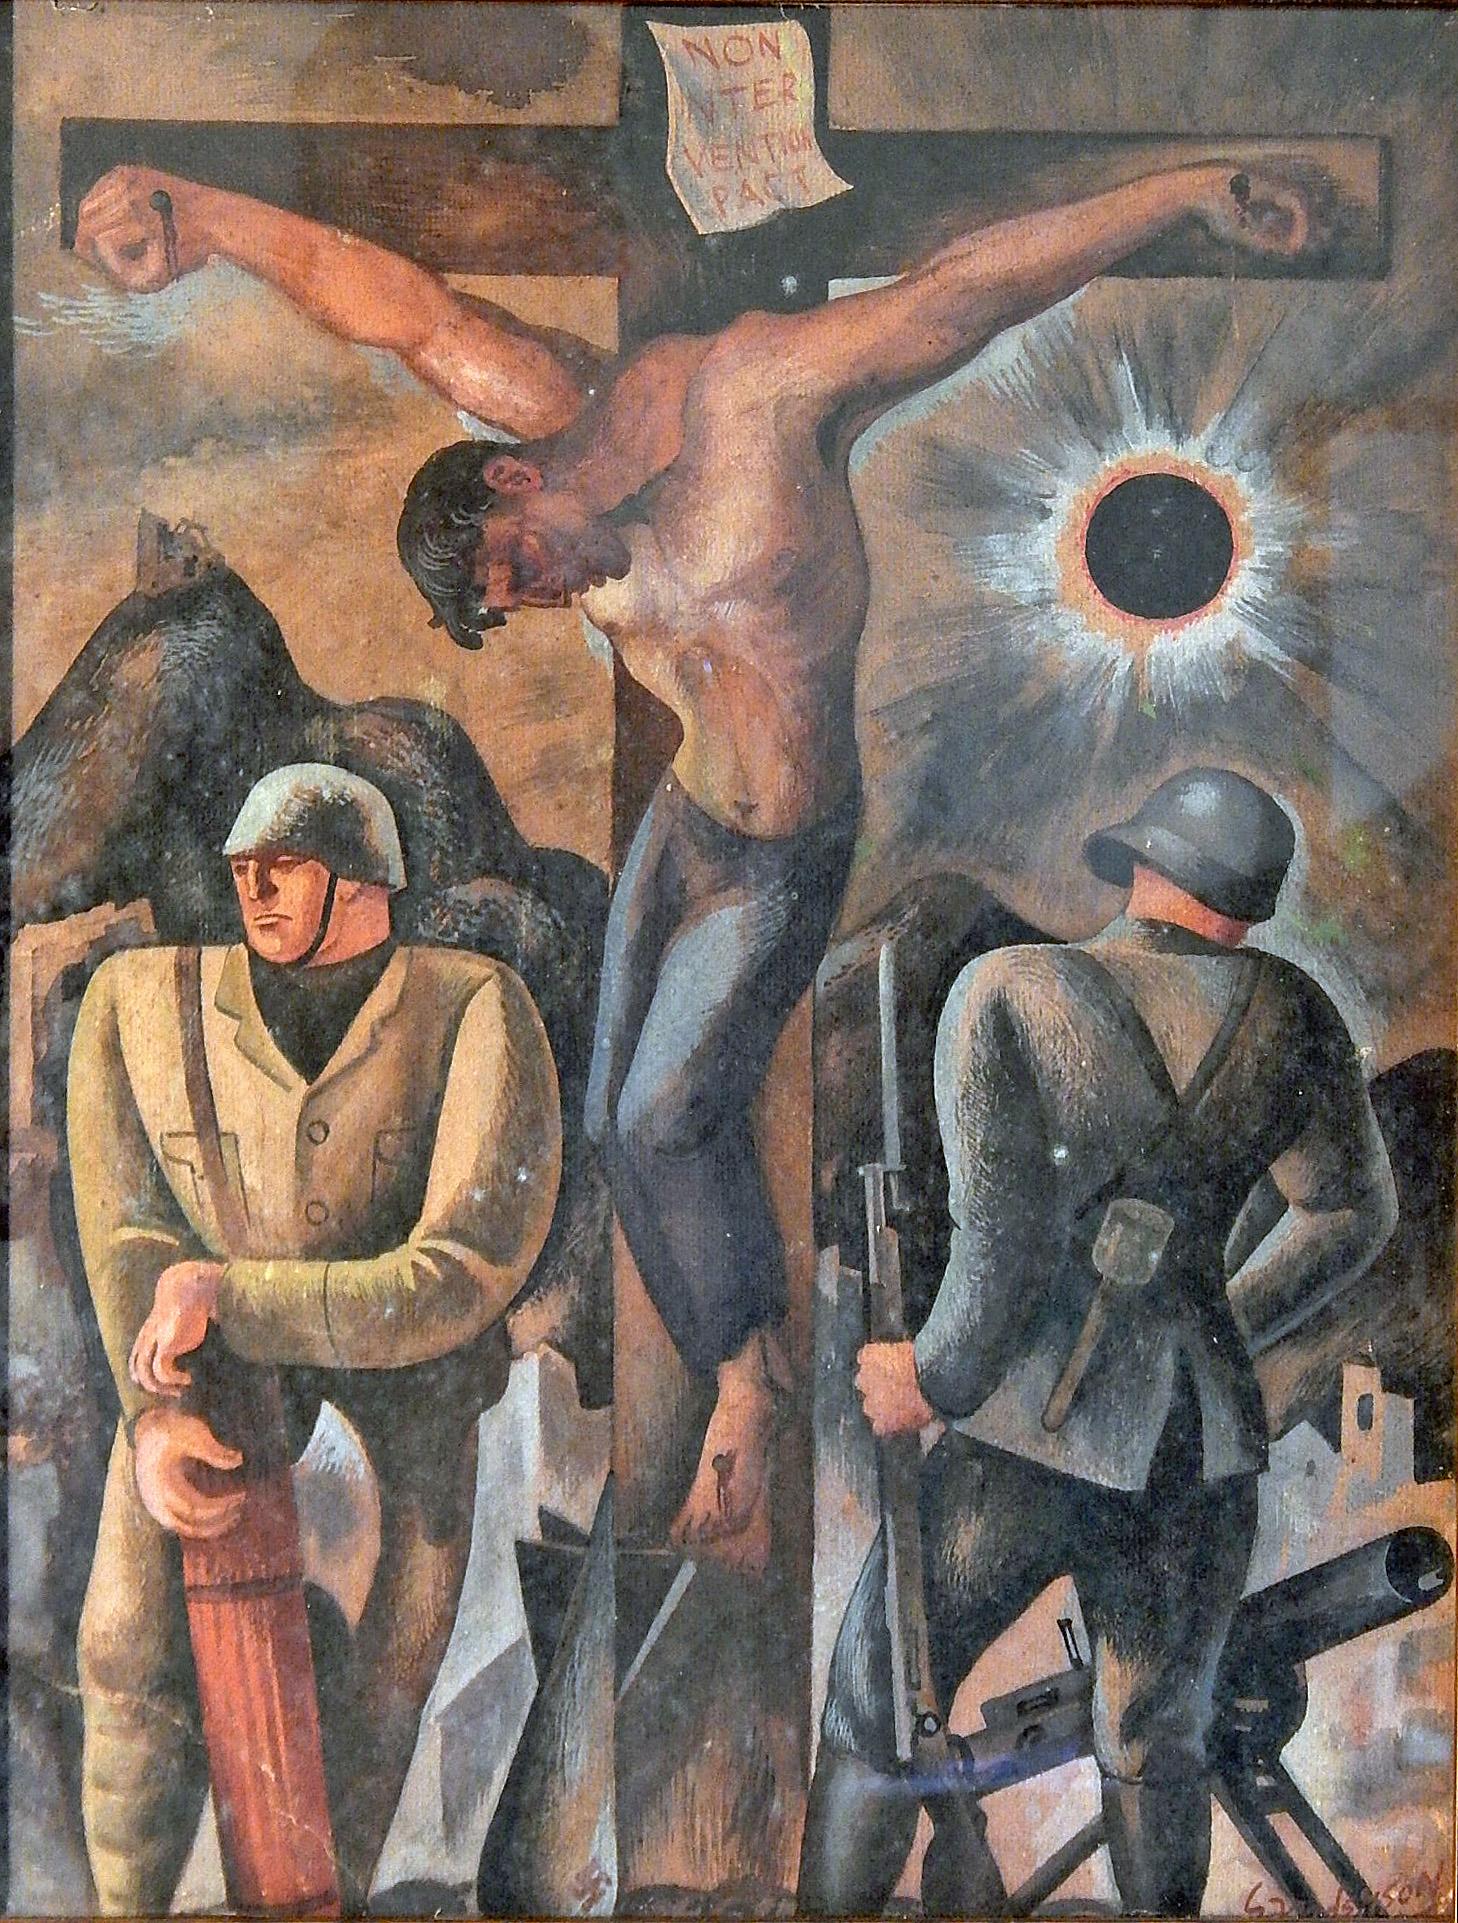 One of the most powerful protest paintings we have ever seen, this remarkable view of a crucified figure representing Spain, surmounted by a placard marked 